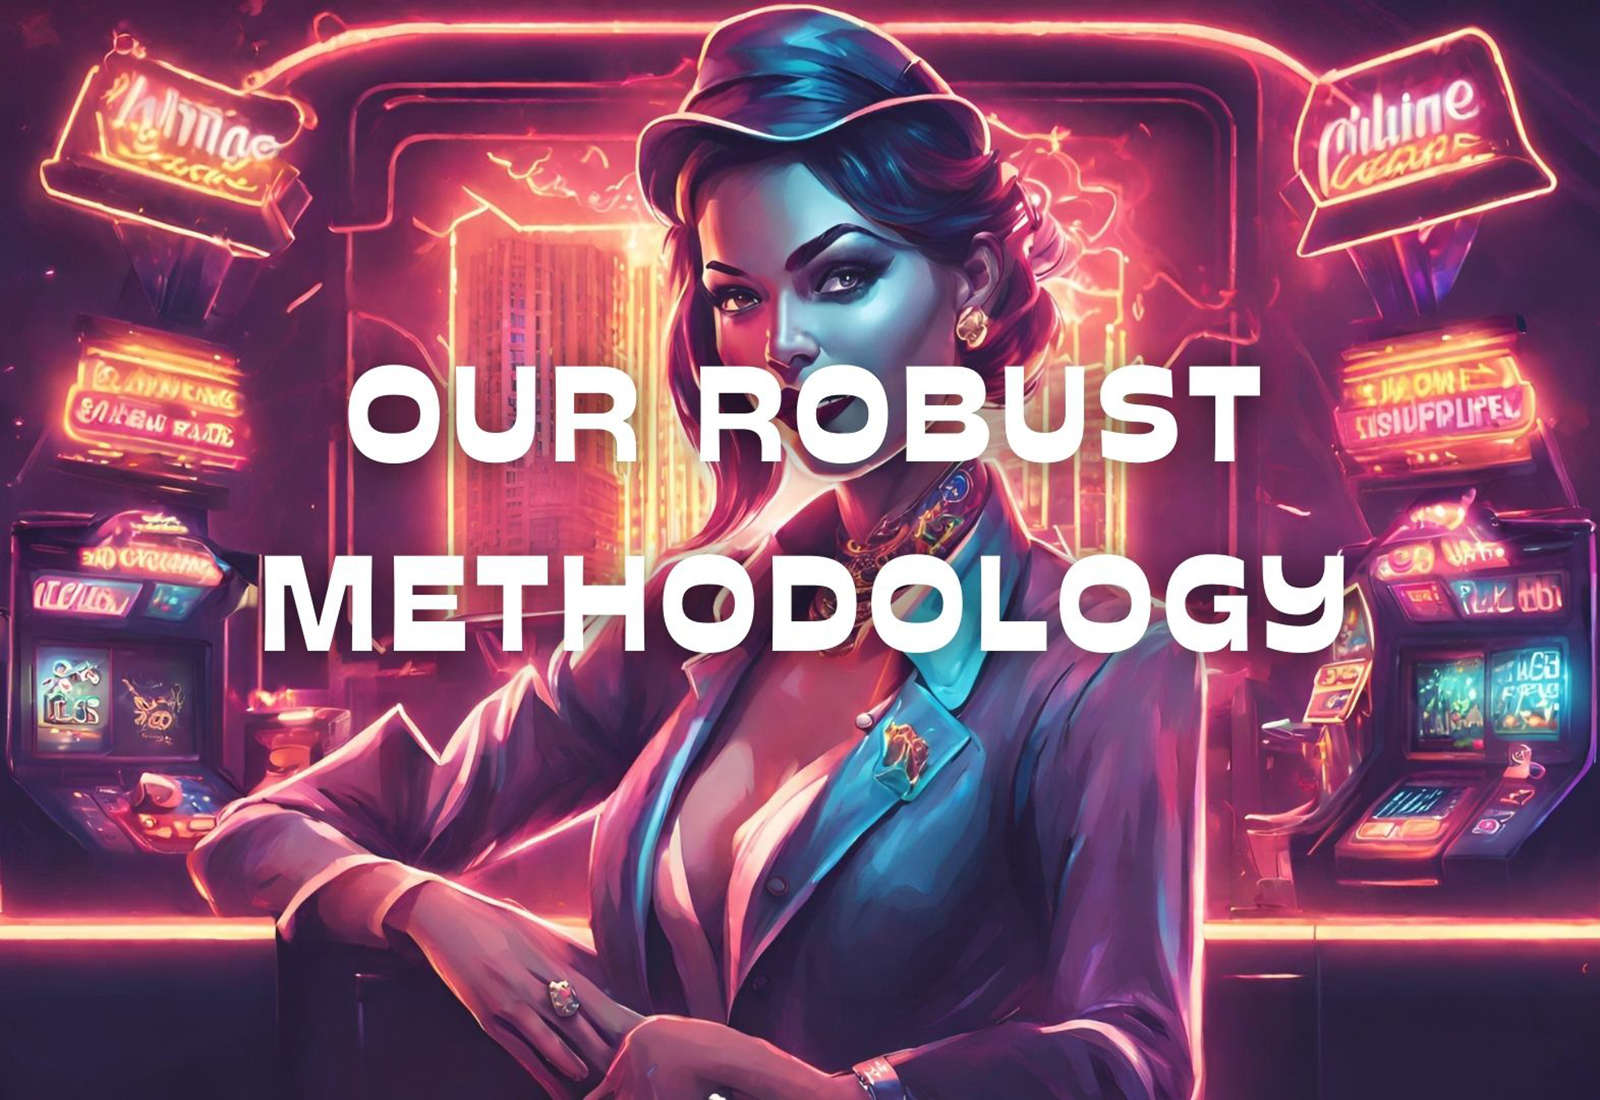 Our Methodology